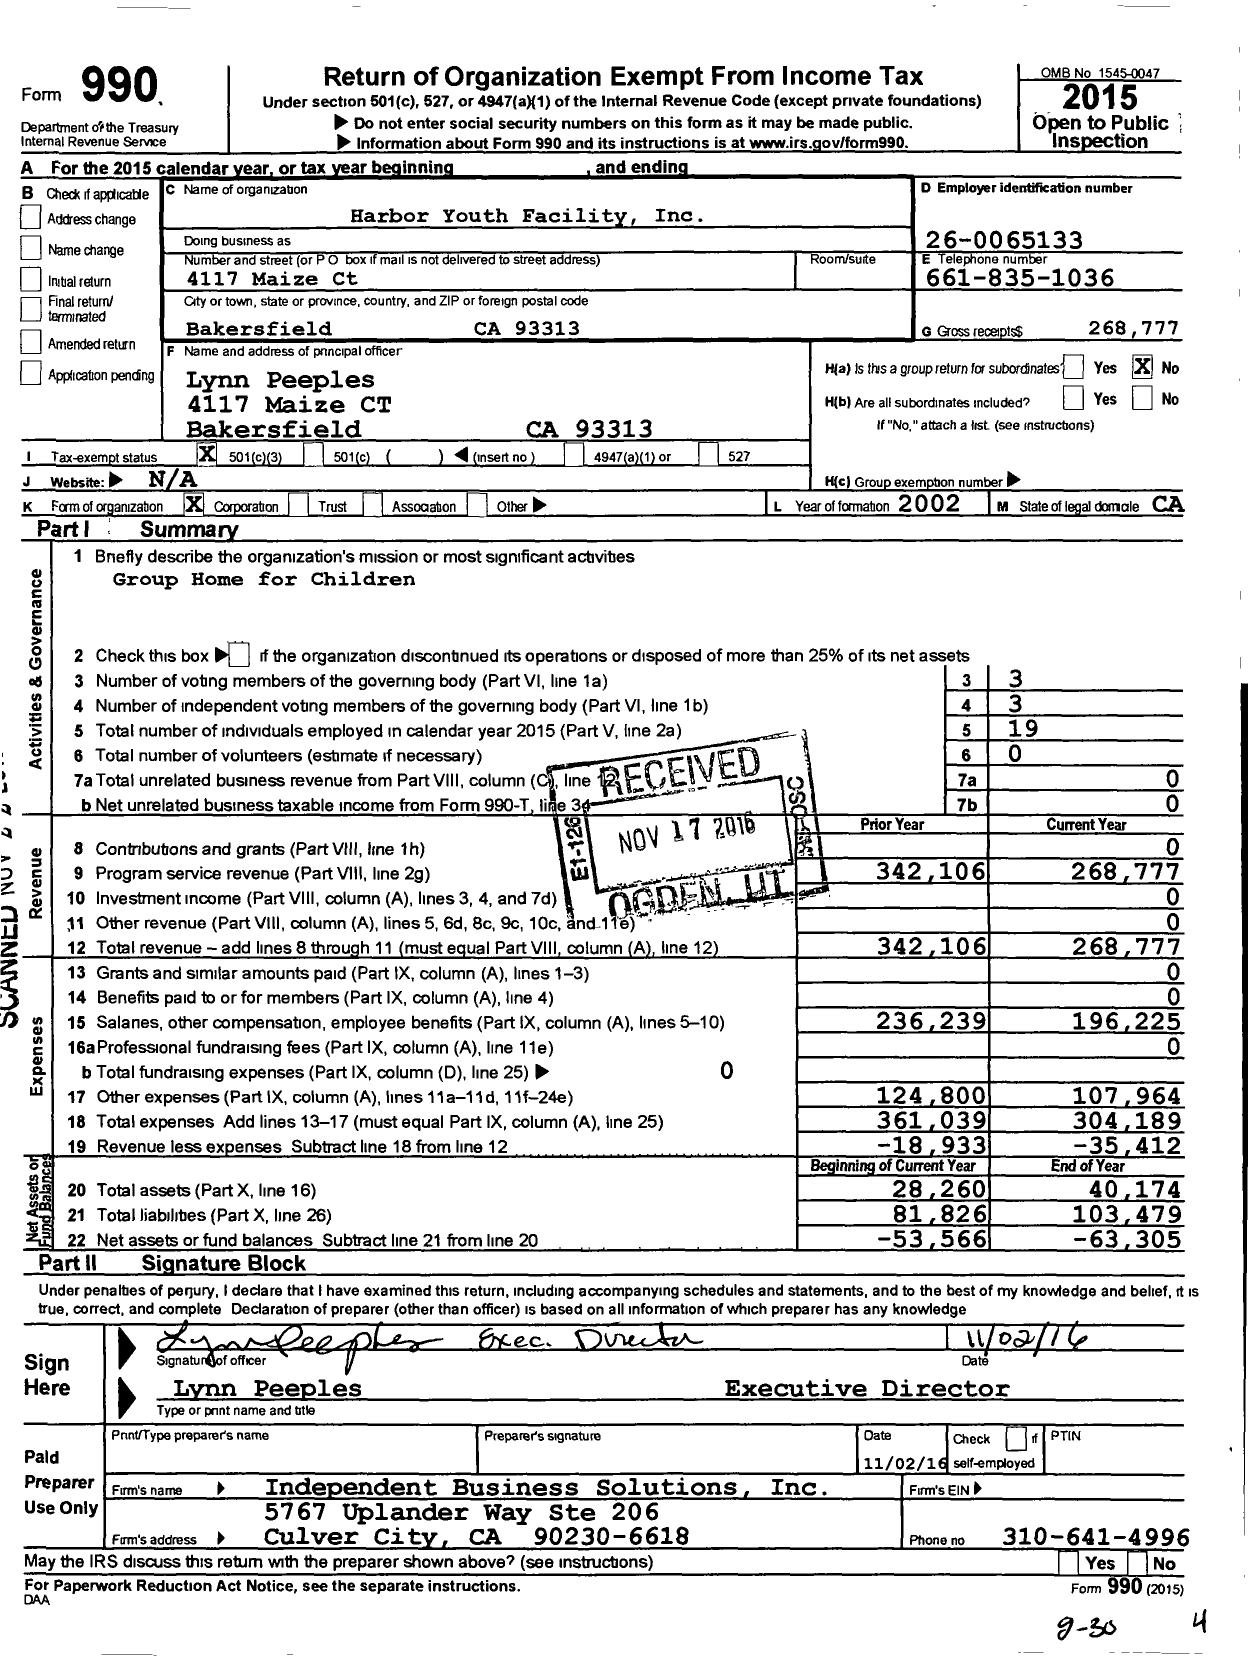 Image of first page of 2015 Form 990 for Harbor Youth Facility